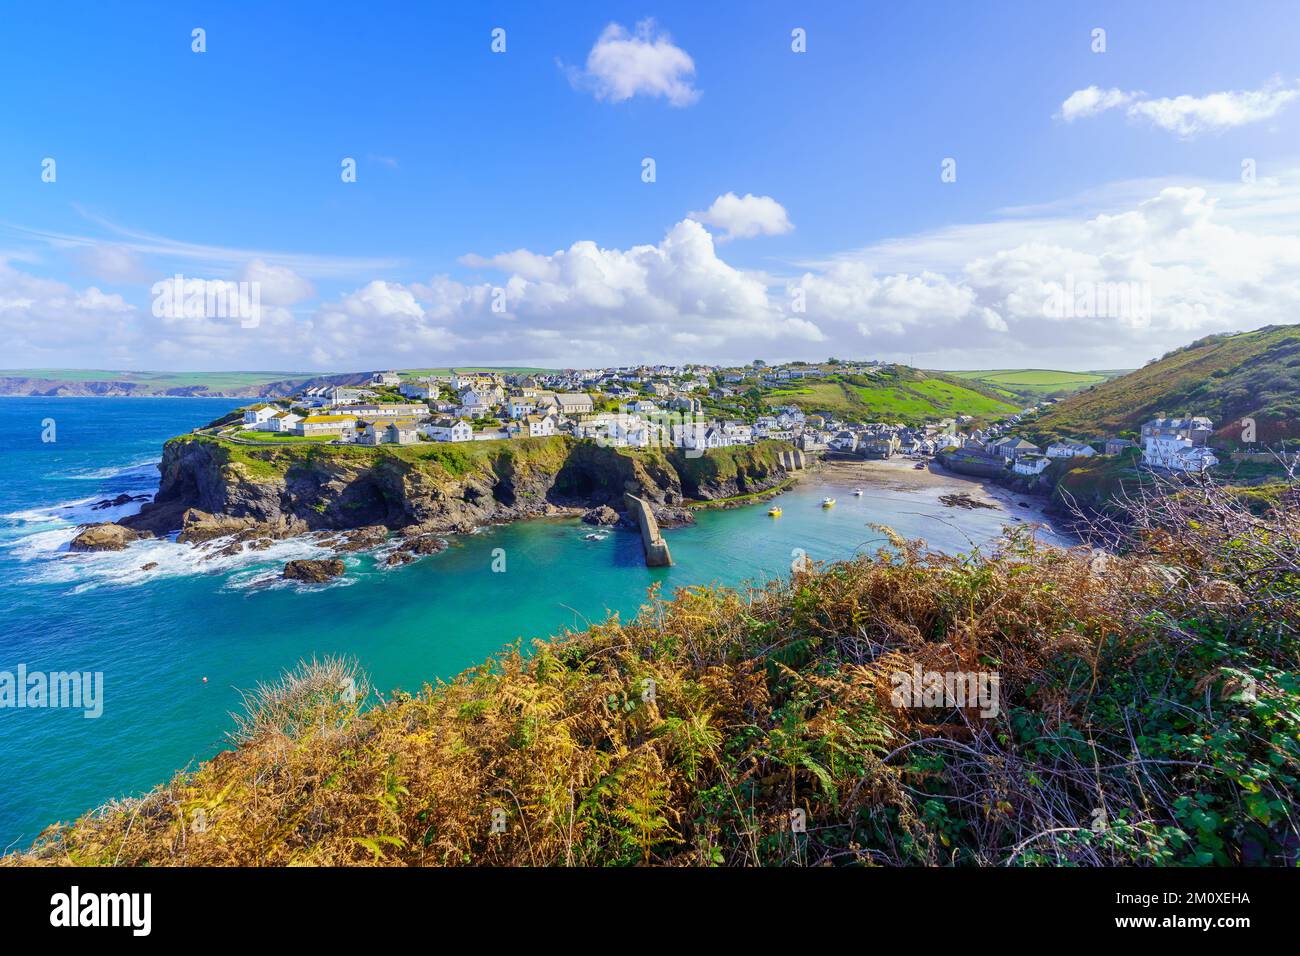 View of the village, port and bay in Port Isaac, Cornwall, England, UK Stock Photo